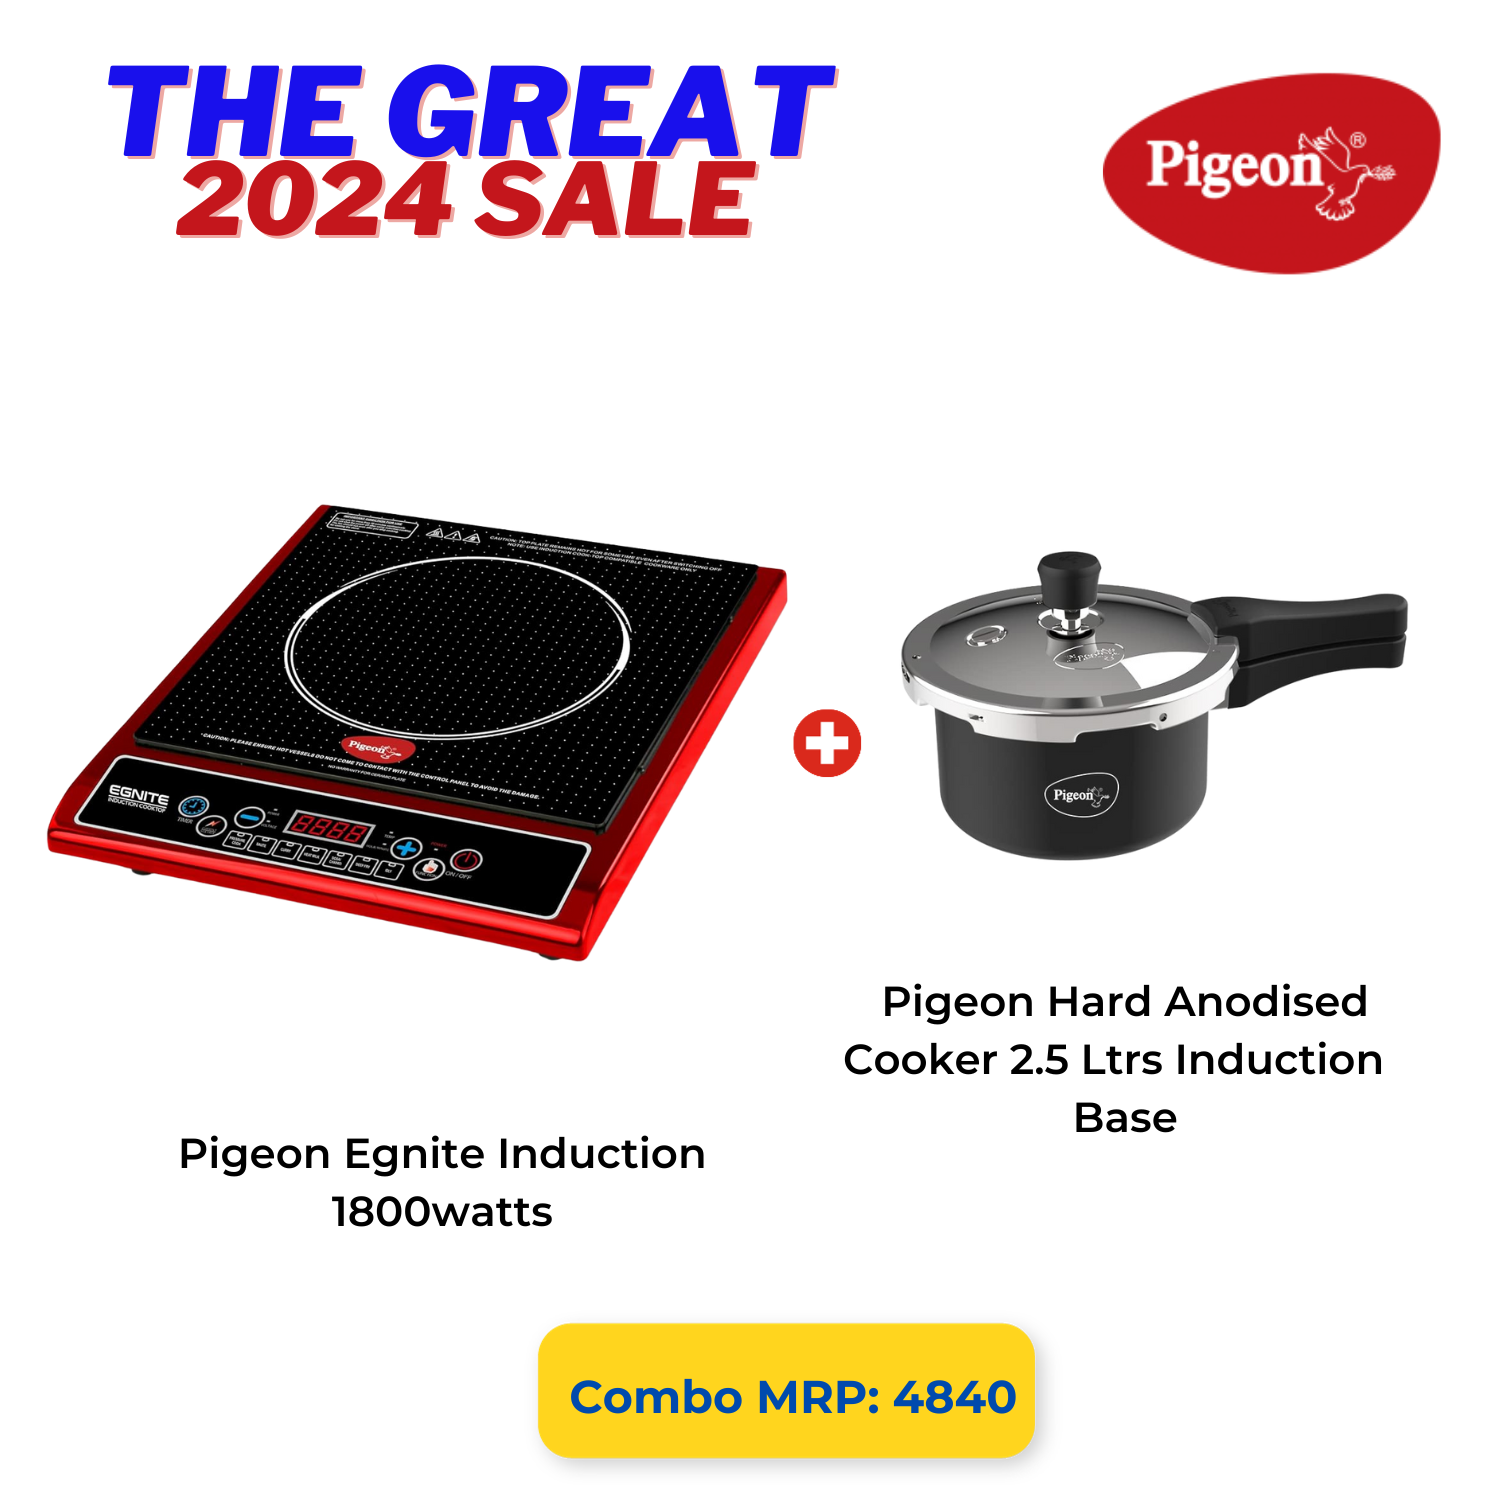 Pigeon The Great 2024 Sale: Egnite 1800W Induction Cooktop + 2.5L Titan Hard Anodised Cooker 🌟🎁 - Limited Stock! 🏃‍♂️💨